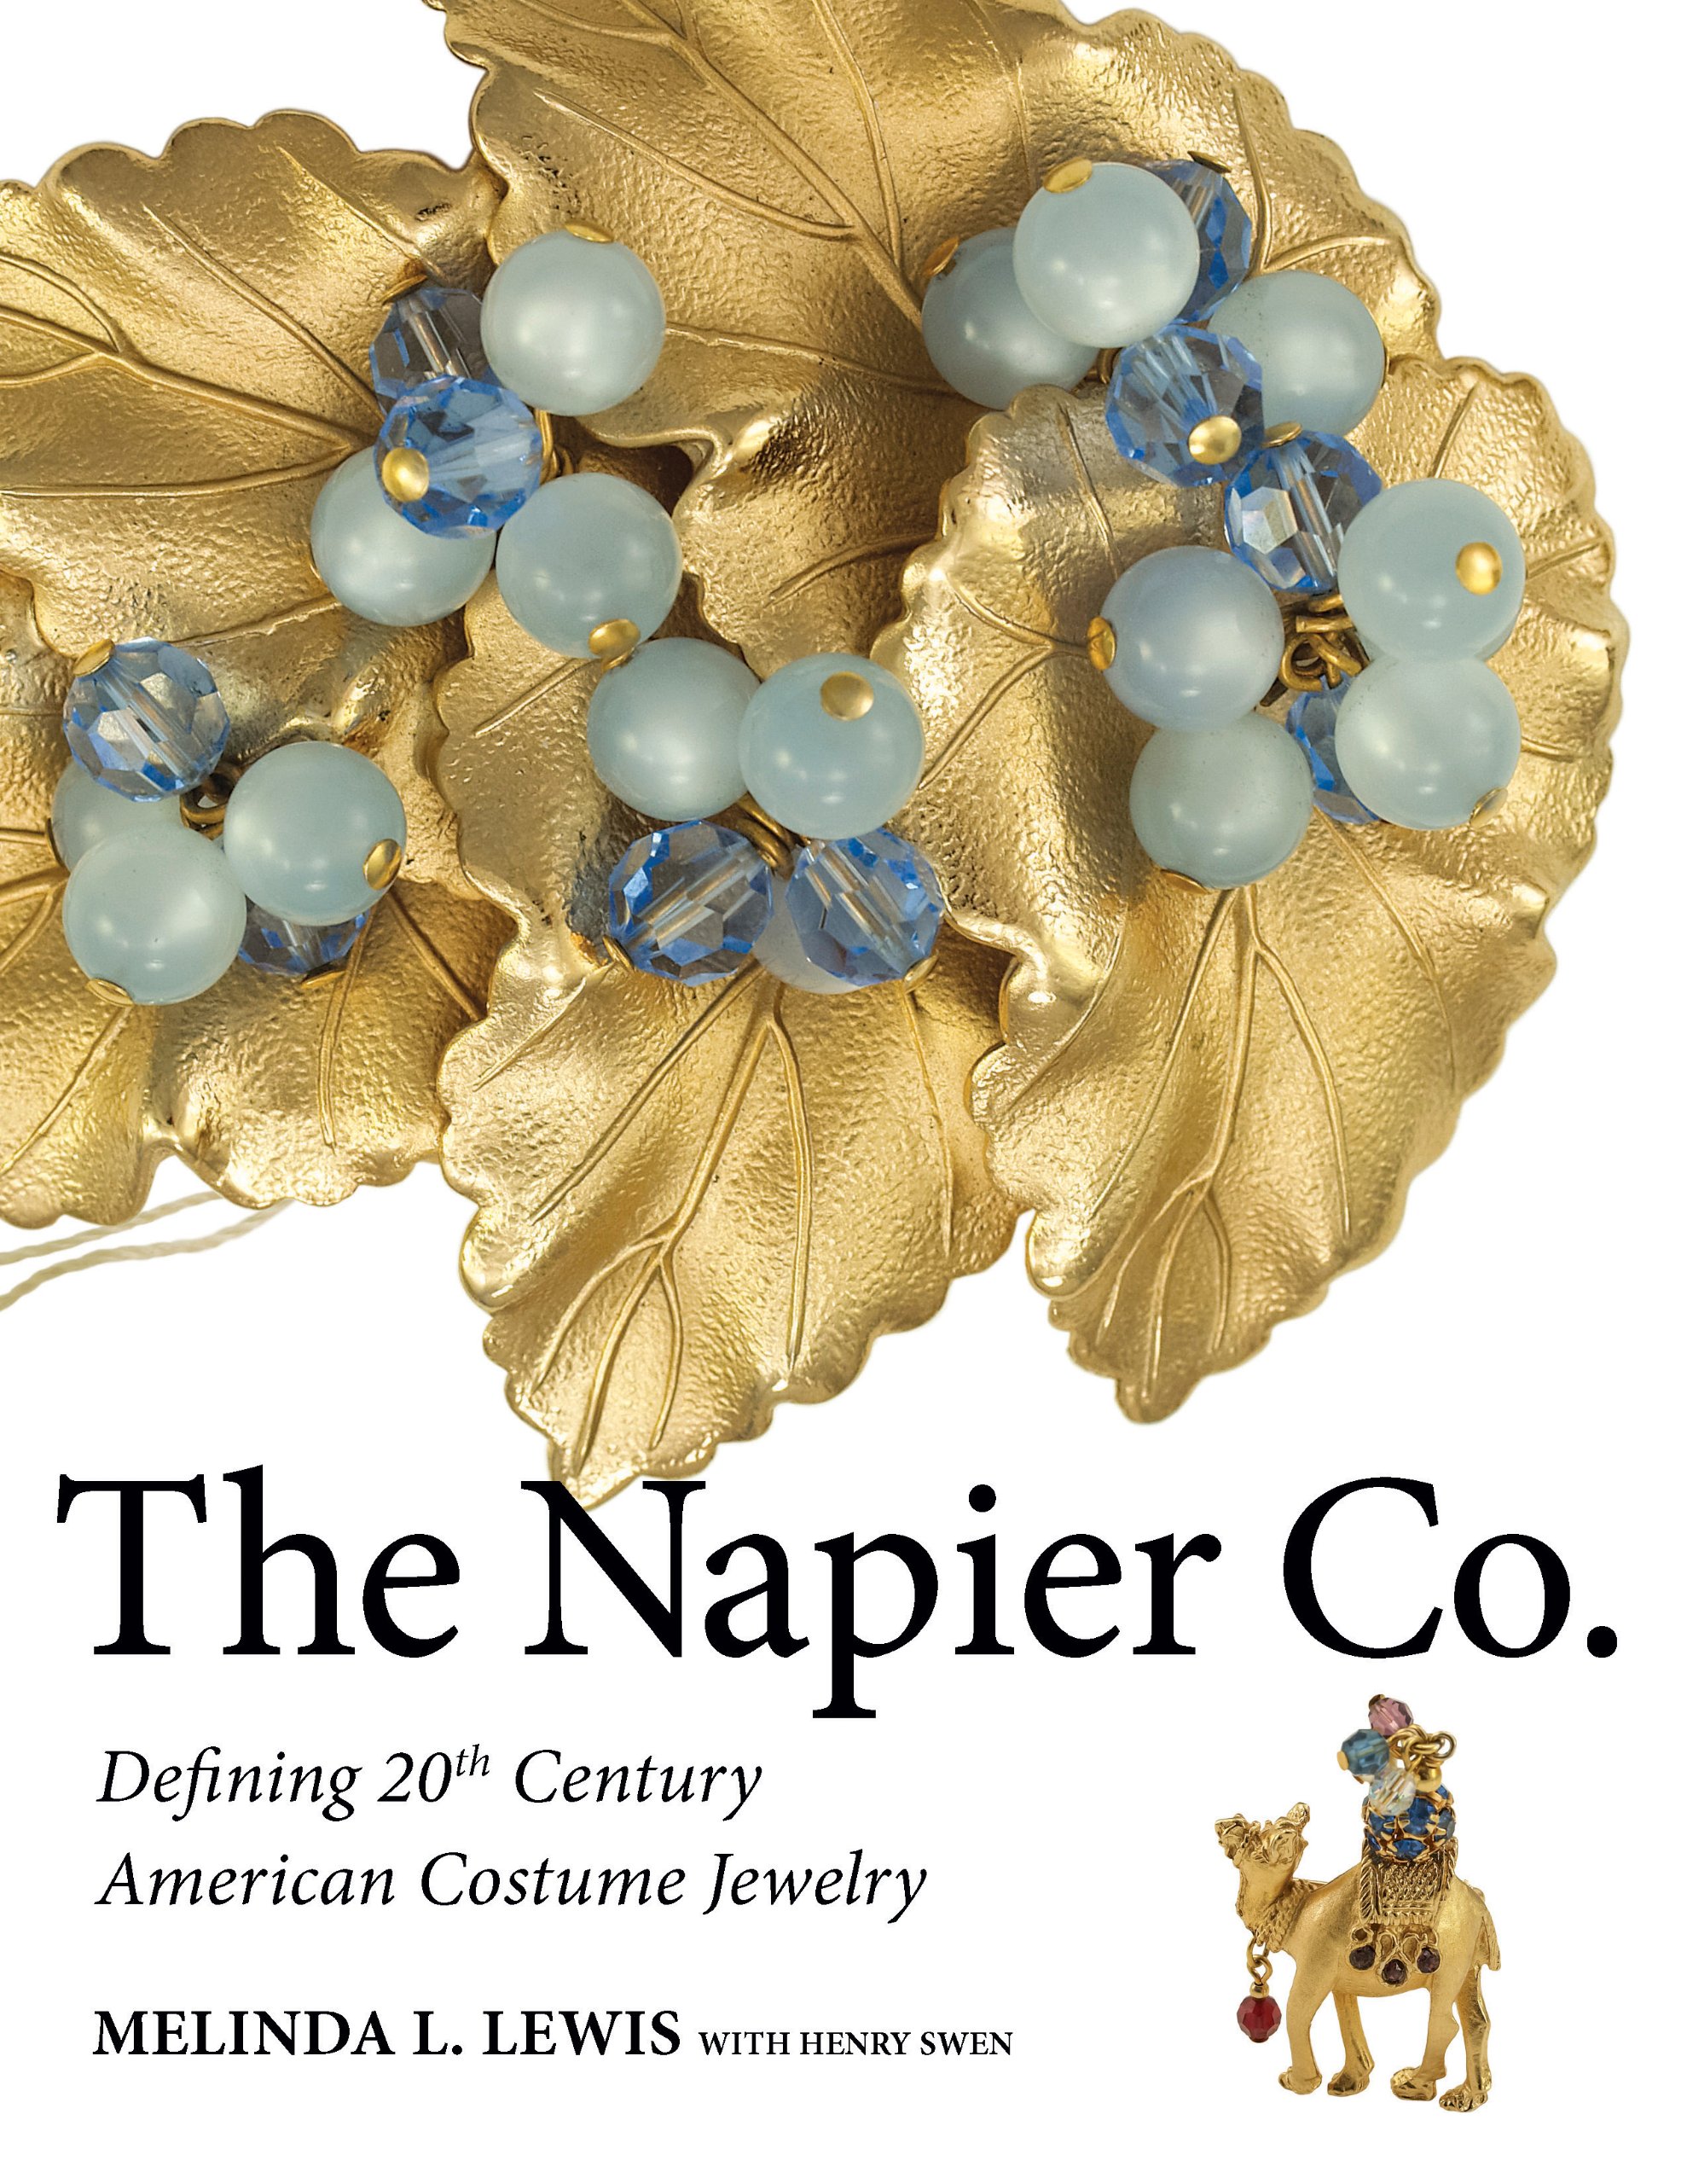 The Napier Co. Defining 20th Century American Costume Jewelry